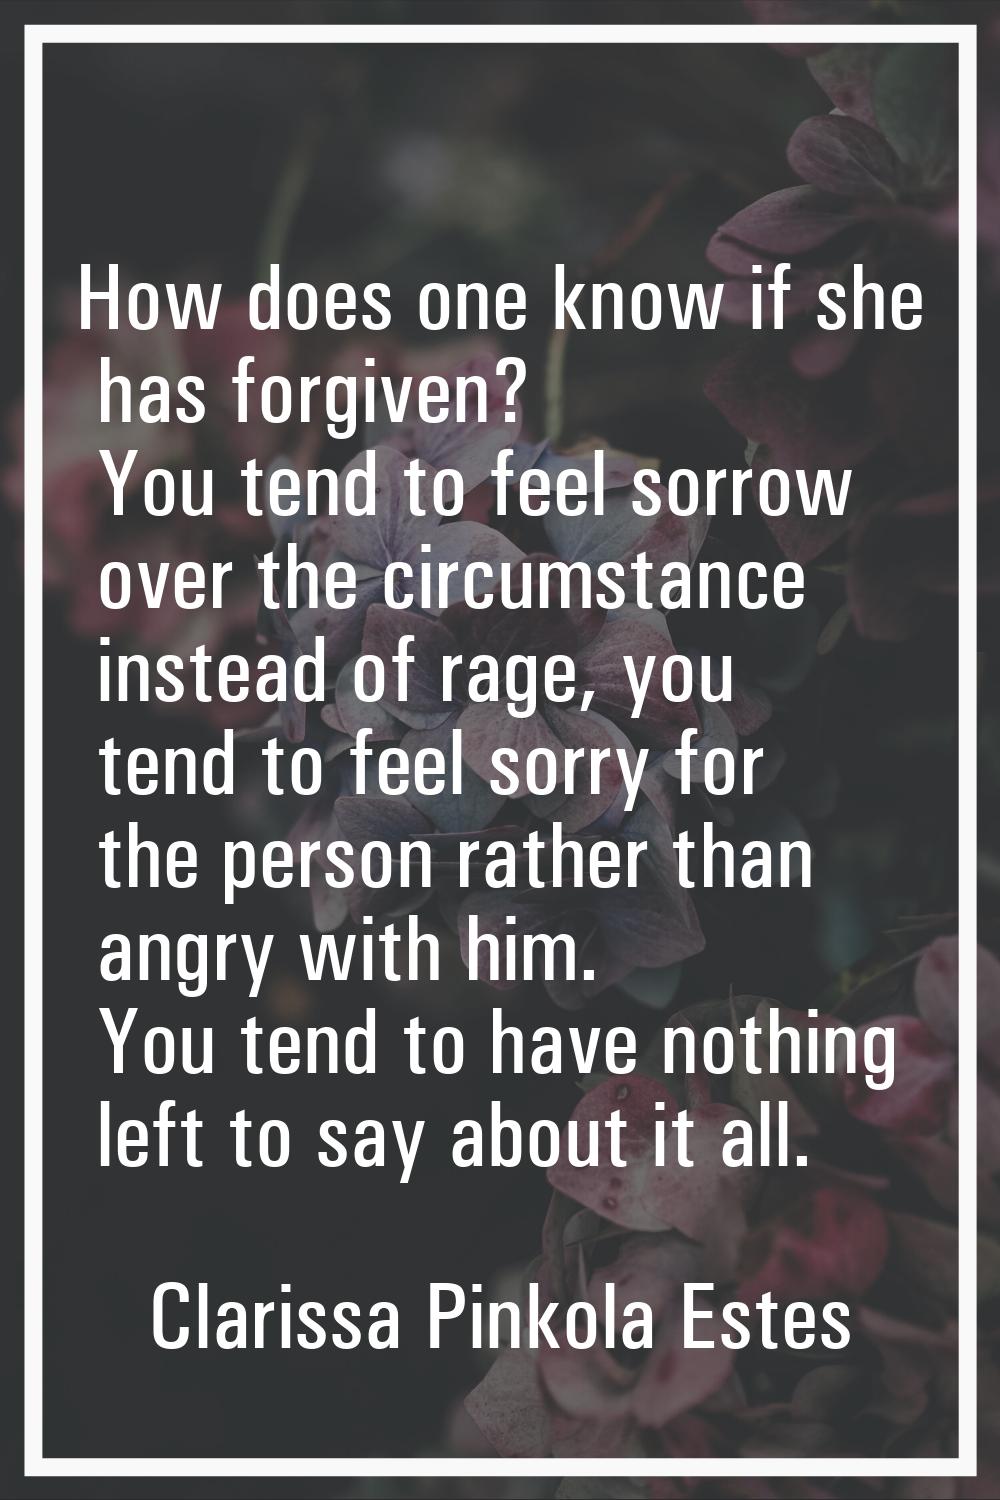 How does one know if she has forgiven? You tend to feel sorrow over the circumstance instead of rag